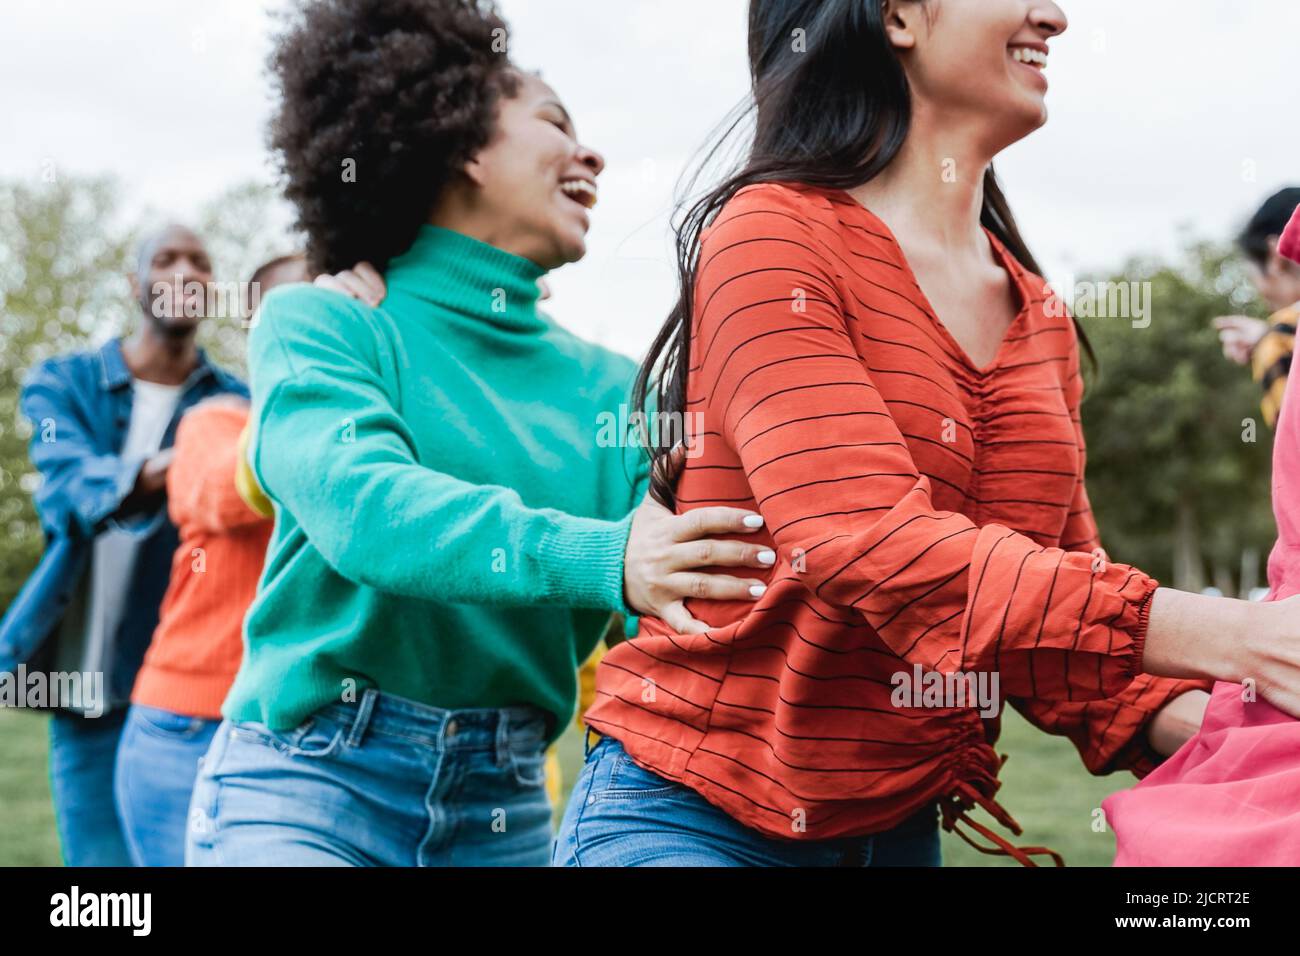 Multiethnic people dancing outdoor - Happy friends having fun at park city - Focus on right girl arm Stock Photo